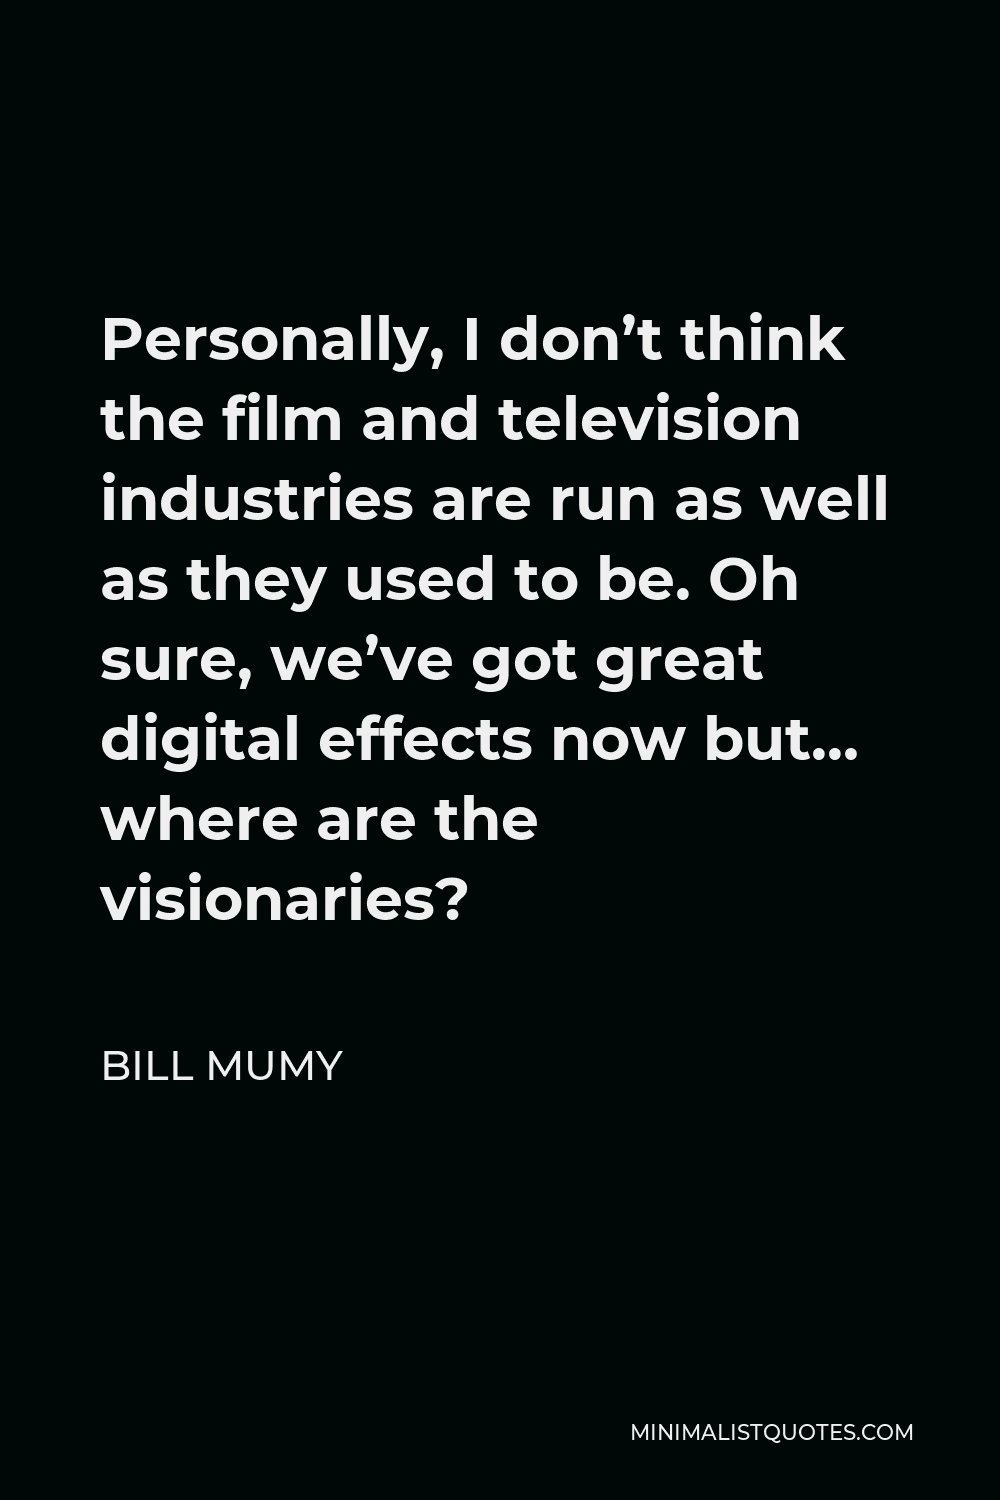 Bill Mumy Quote - Personally, I don’t think the film and television industries are run as well as they used to be. Oh sure, we’ve got great digital effects now but… where are the visionaries?